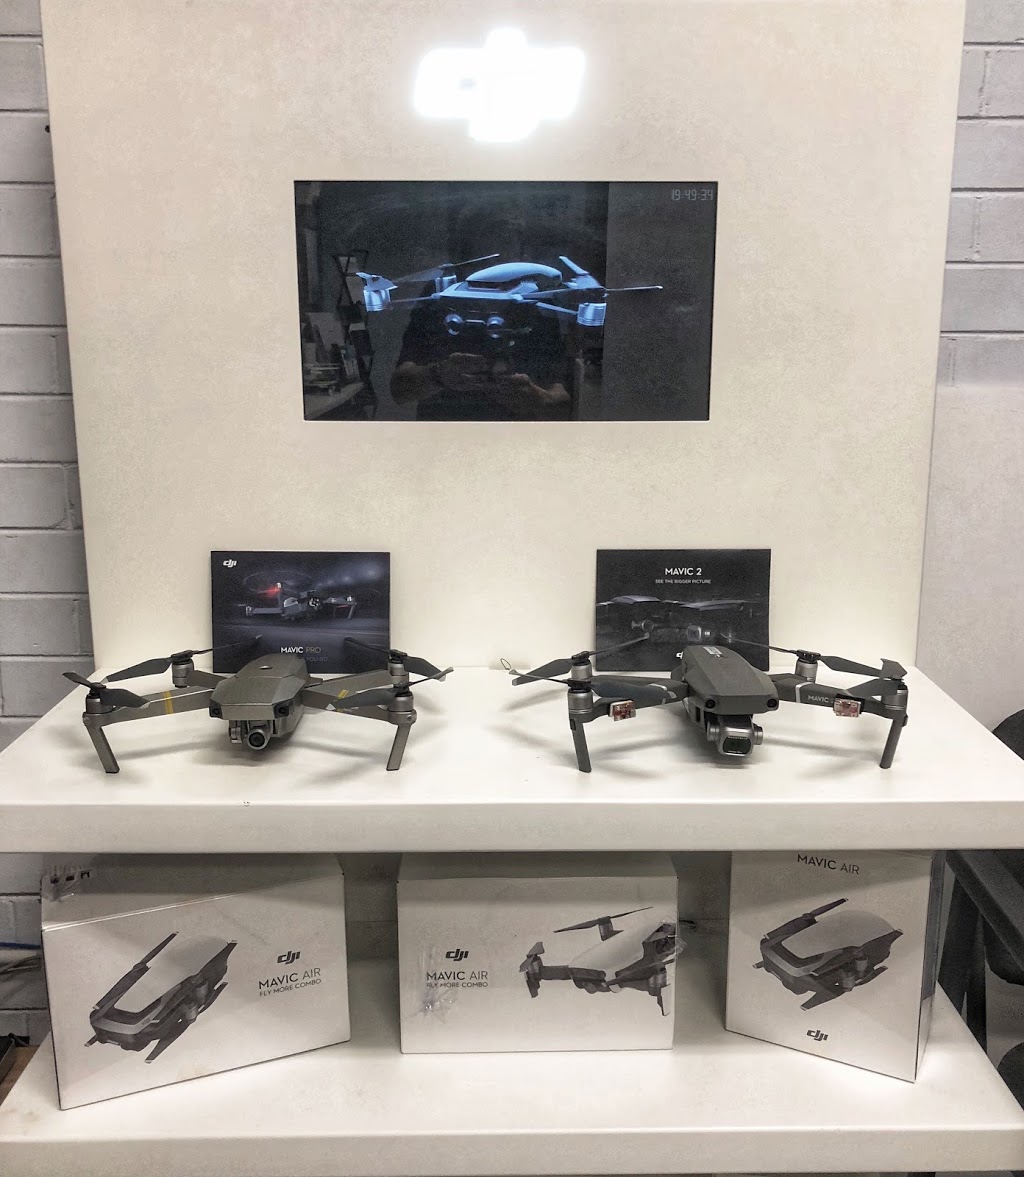 Drone Shop Perth | electronics store | 7a Goongarrie St, Bayswater WA 6053, Australia | 0862781333 OR +61 8 6278 1333